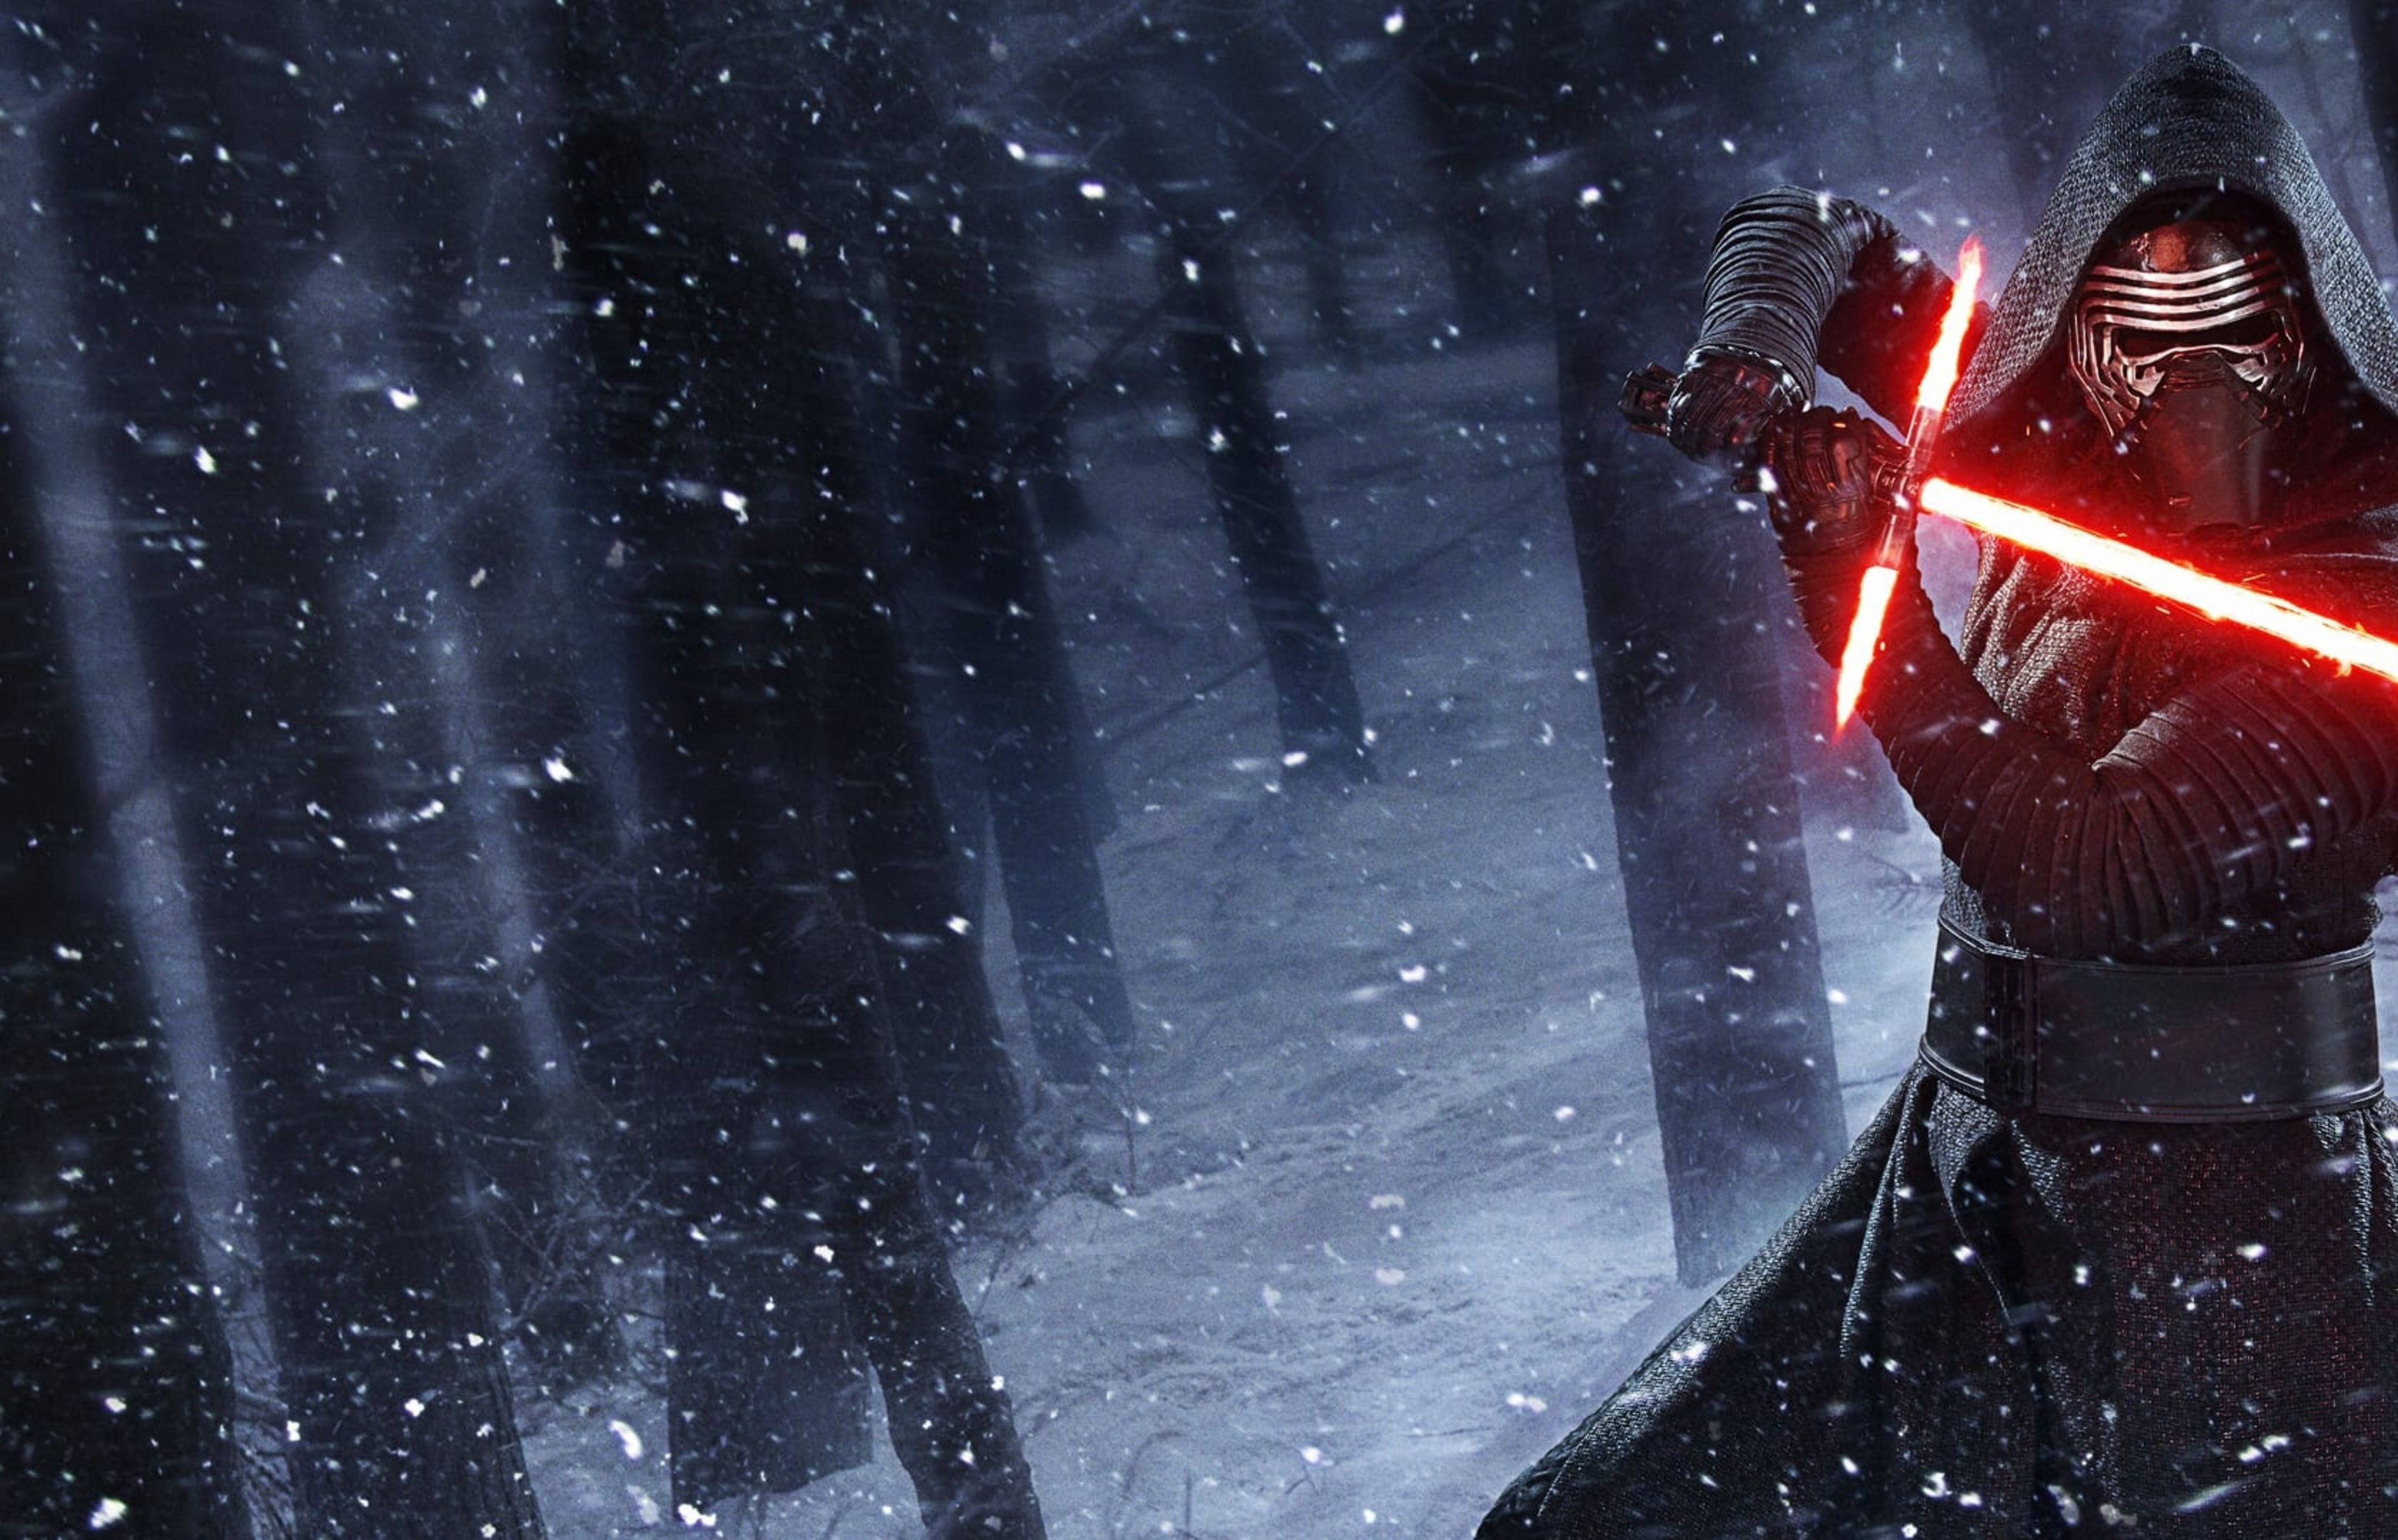 Kylo Ren [Ultra Hi-Res Textless Wallpaper] by Lightsabered on ...